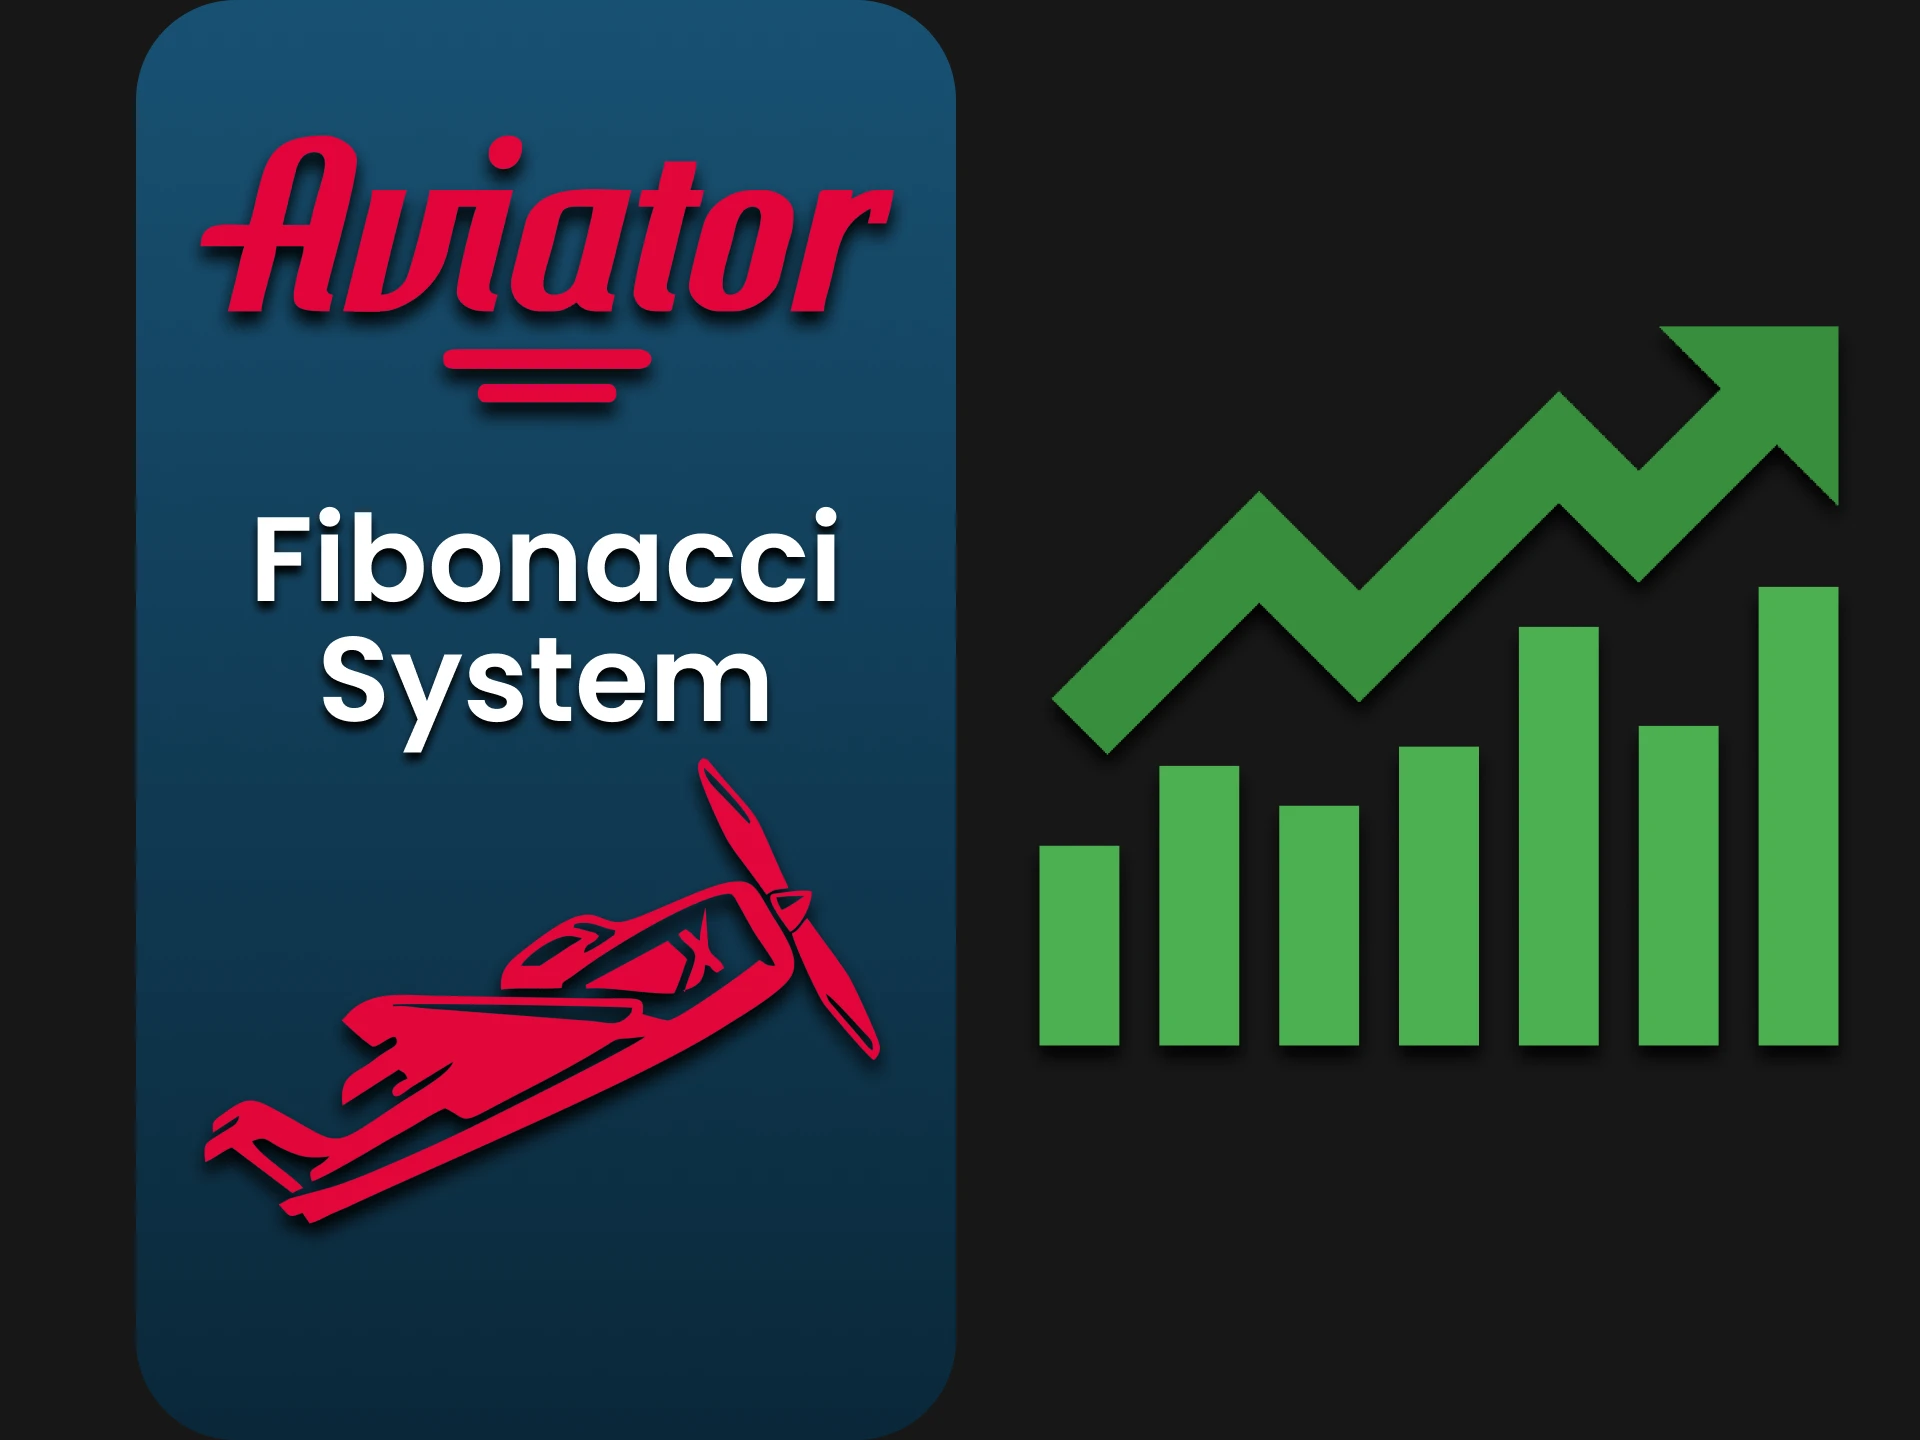 Find out about this system of playing Aviator as Fibonacci.